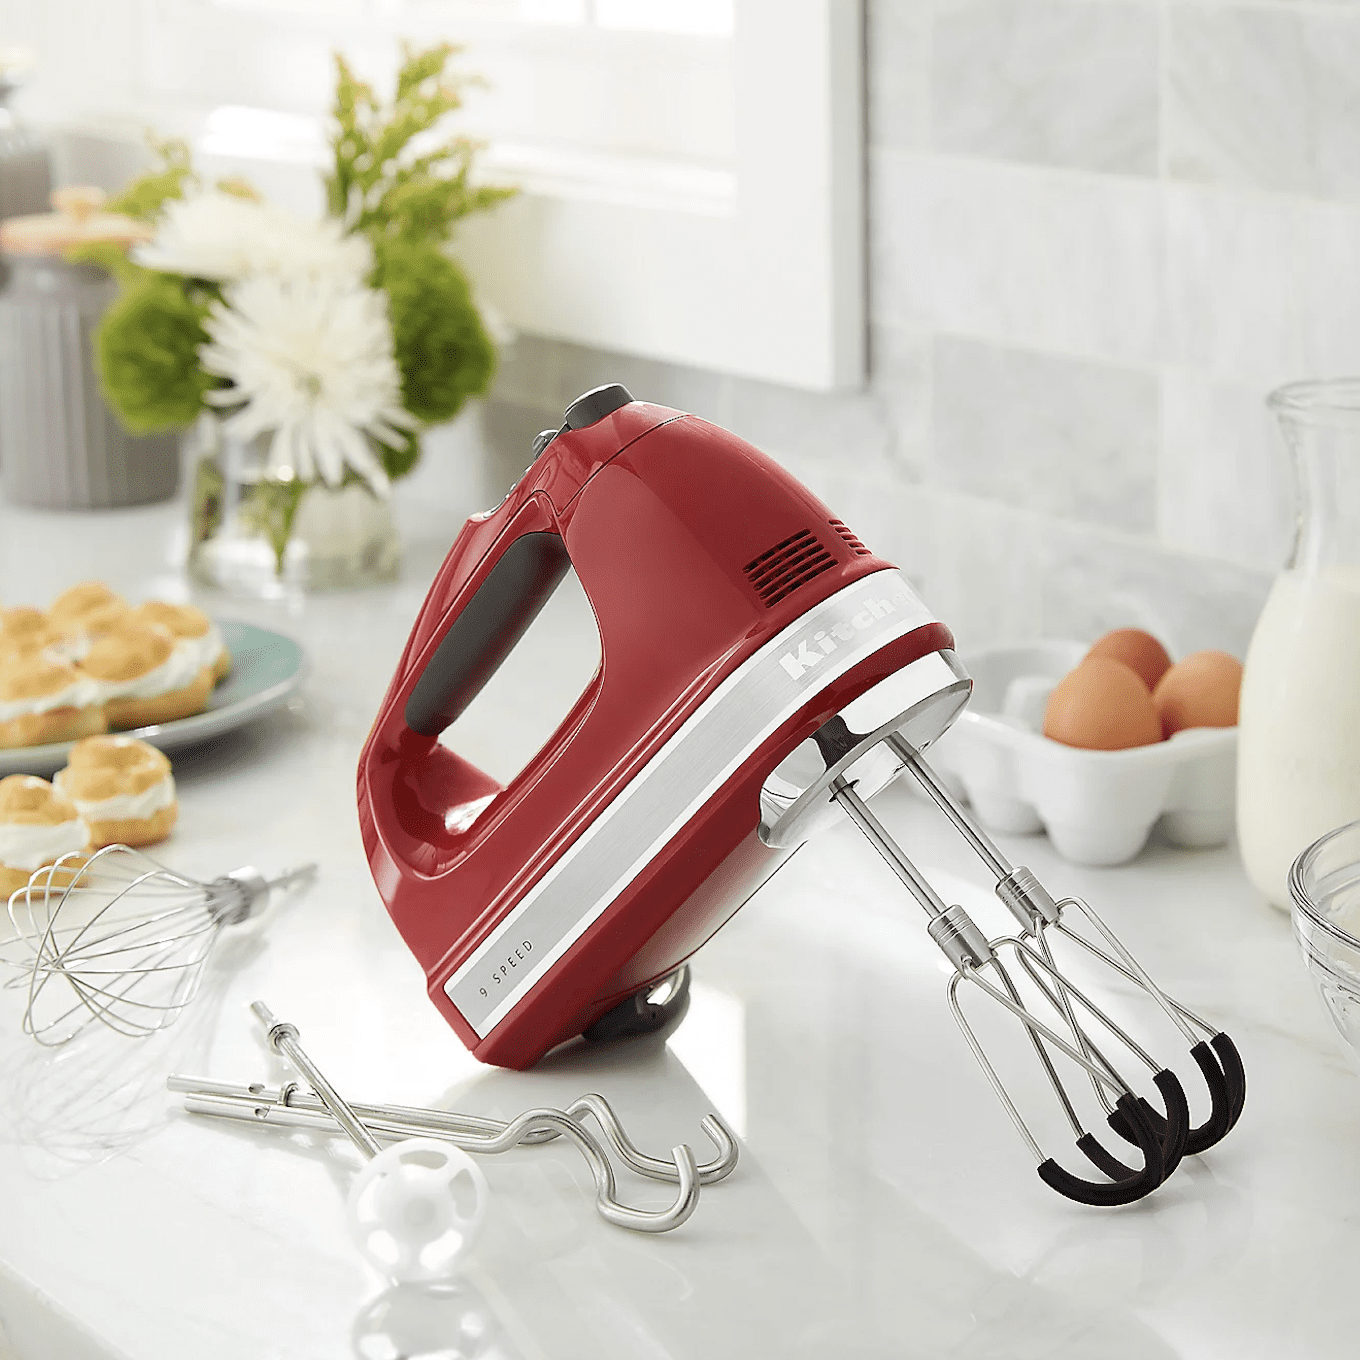 KitchenAid Shave Ice Stand Mixer Attachment w/ 8 Ice Molds on QVC 